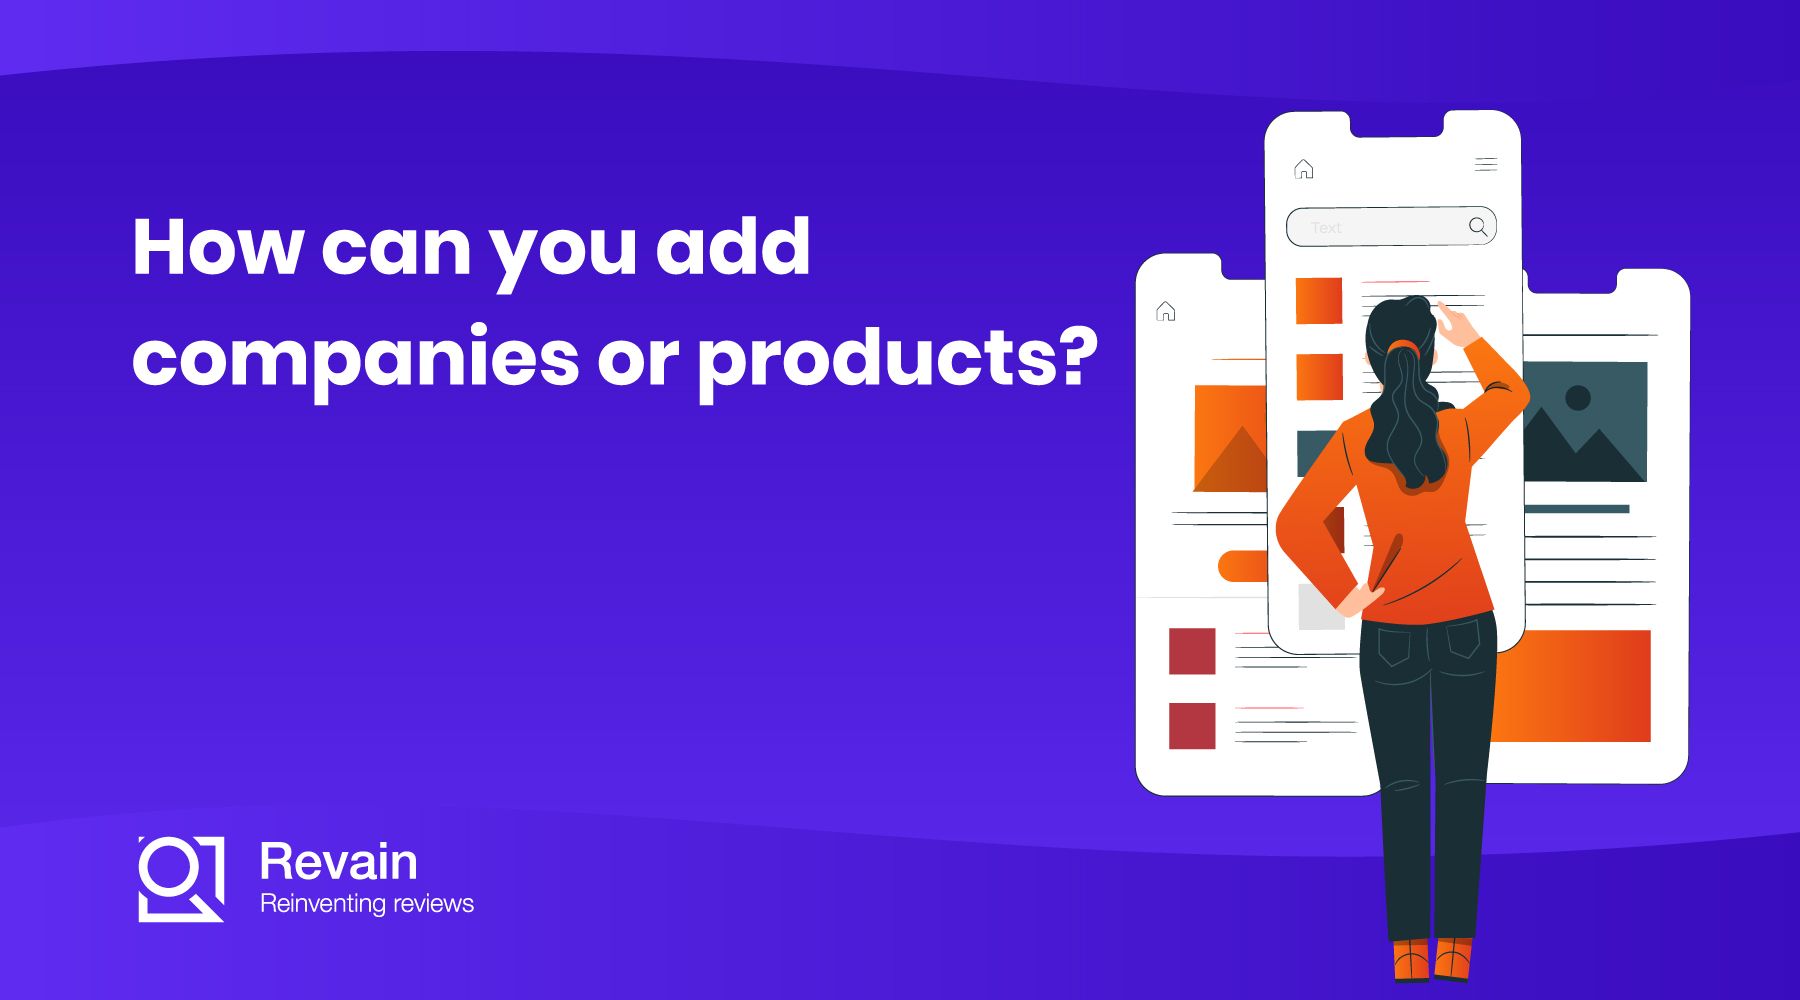 Article How can you add companies or products?